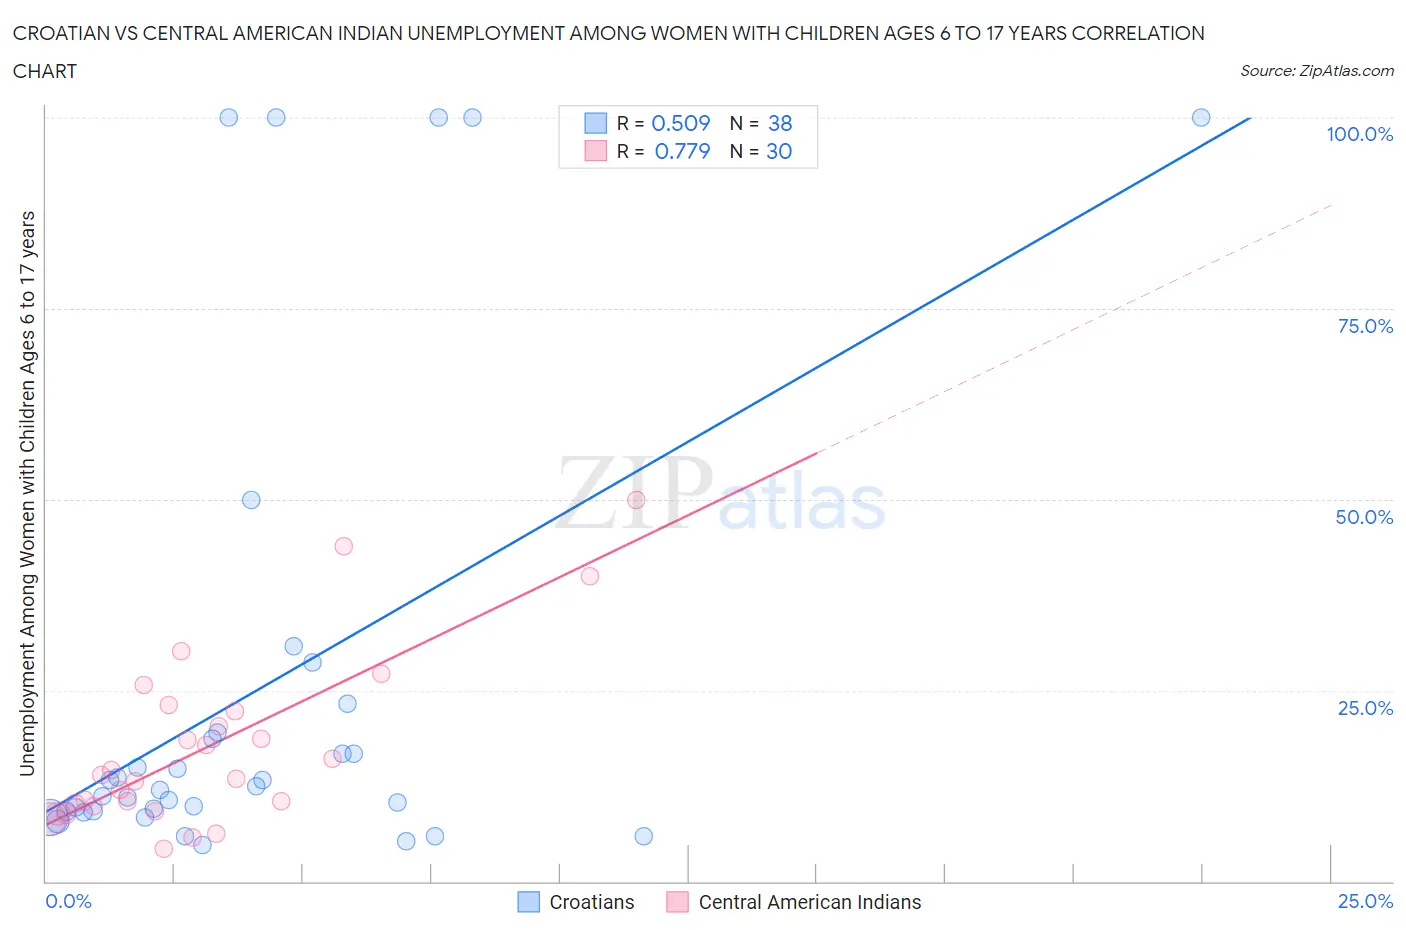 Croatian vs Central American Indian Unemployment Among Women with Children Ages 6 to 17 years